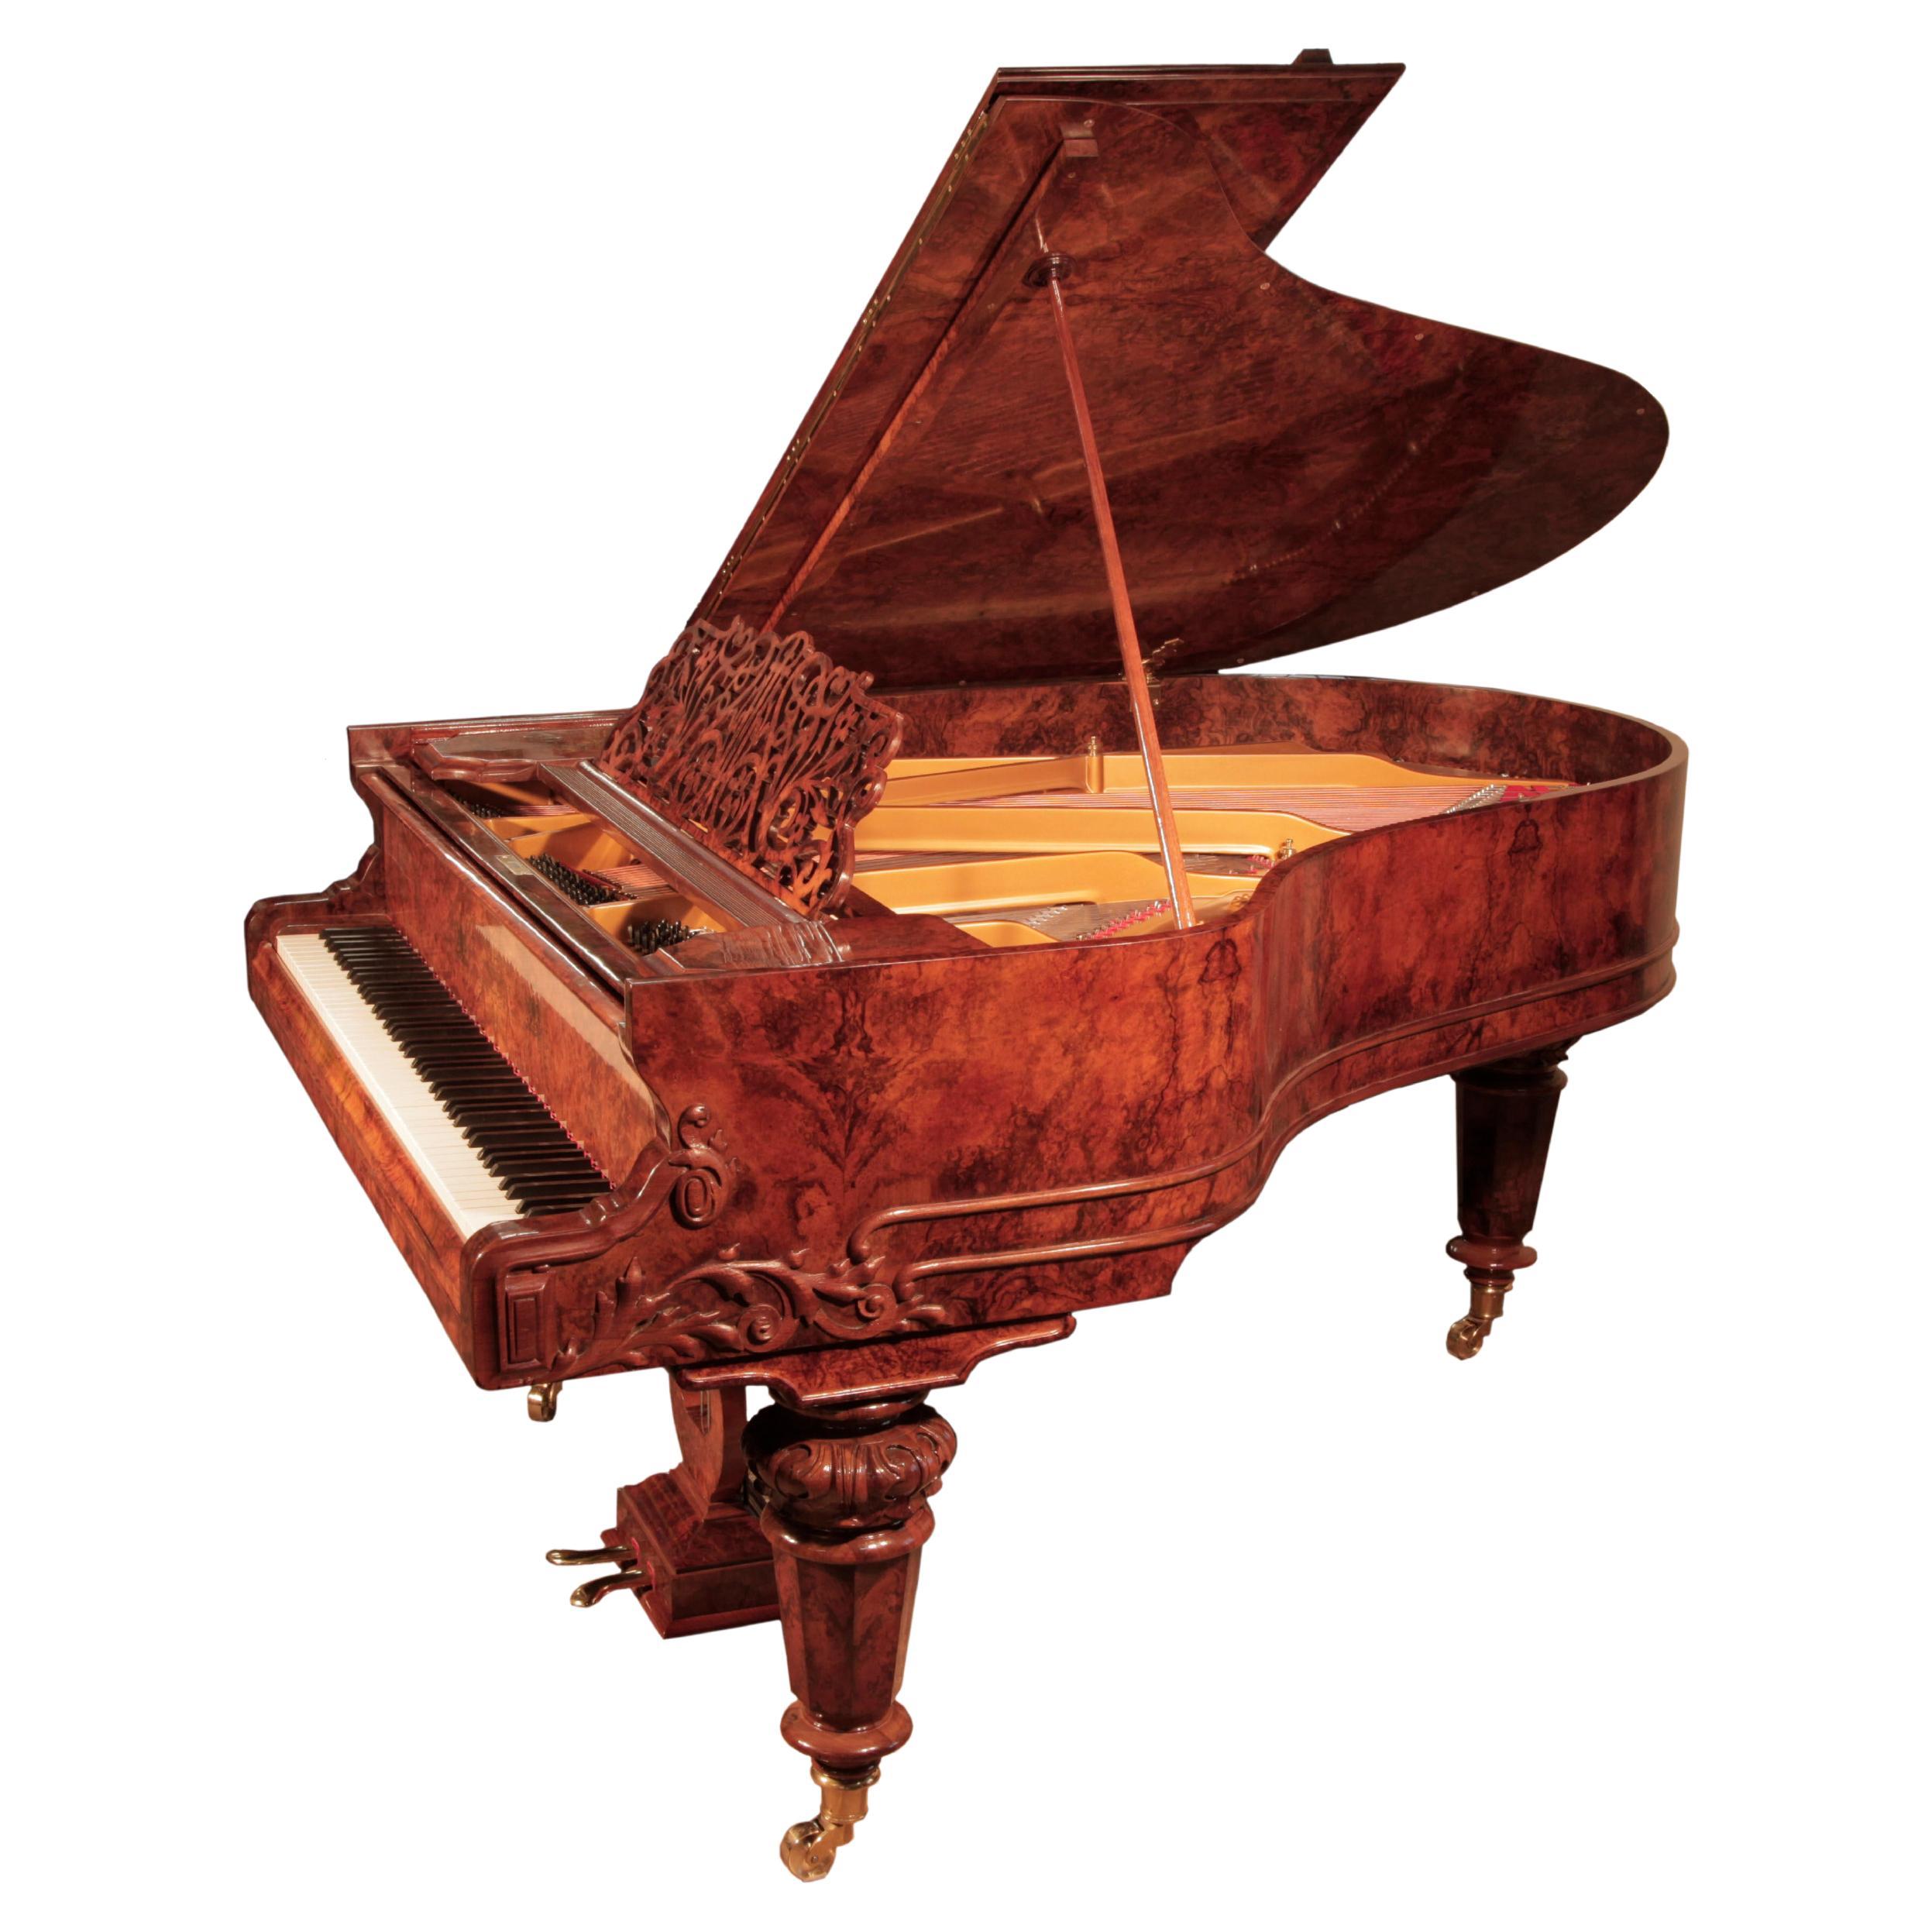 Schiedmayer Grand Piano Walnut Carved Cheeks Filigree Music Desk Faceted Legs For Sale